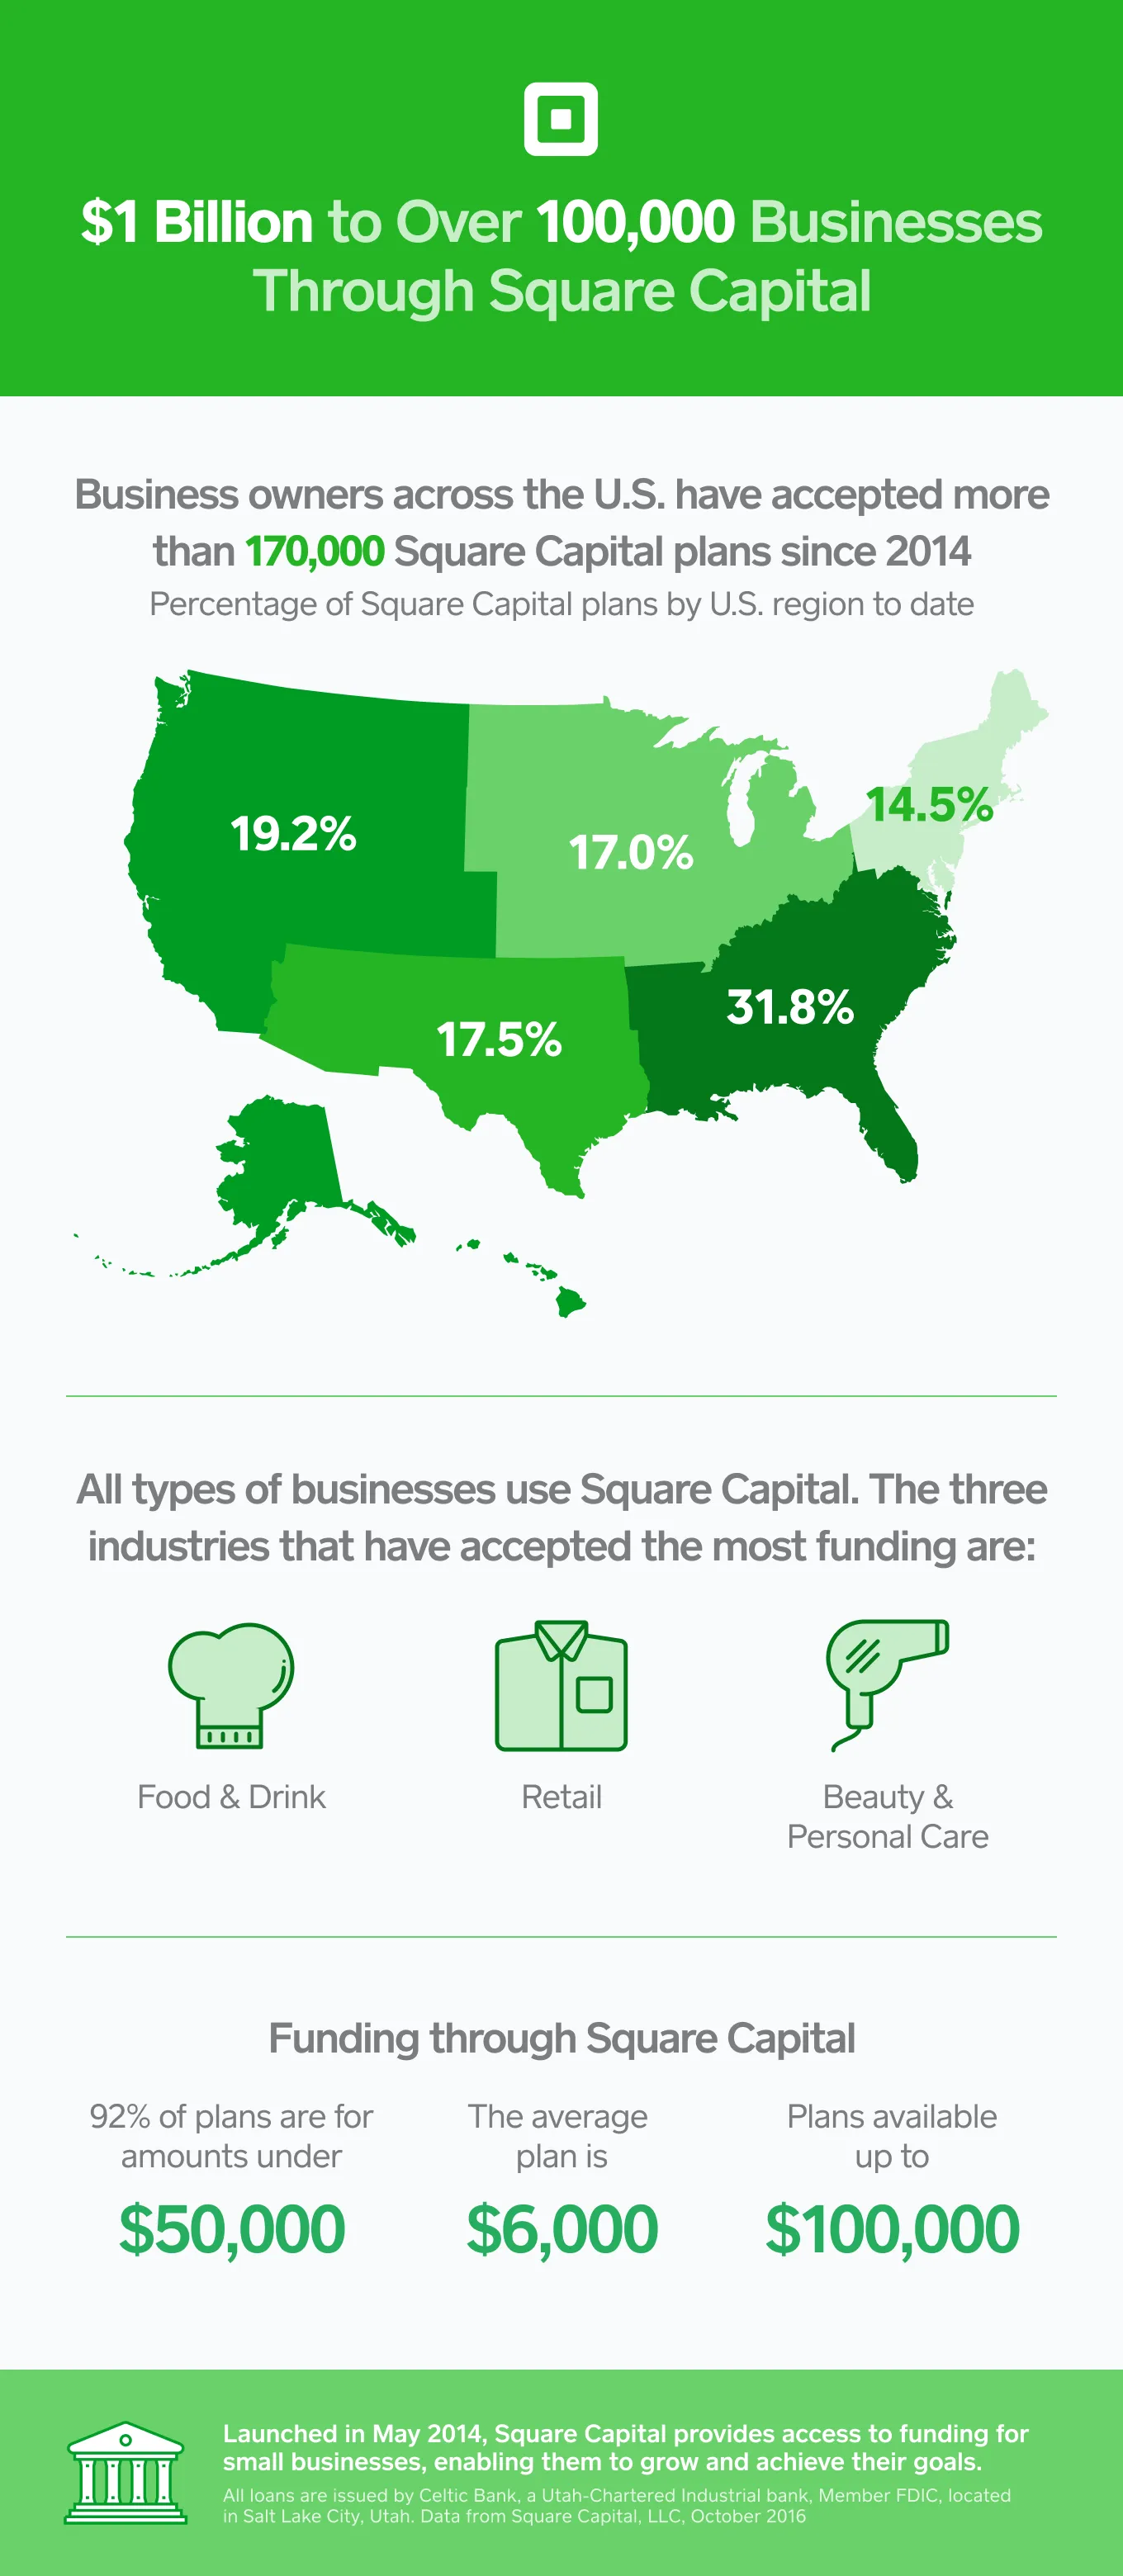 Square Capital: $1 Billion in Funding to Over 100,000 sellers - Infographic